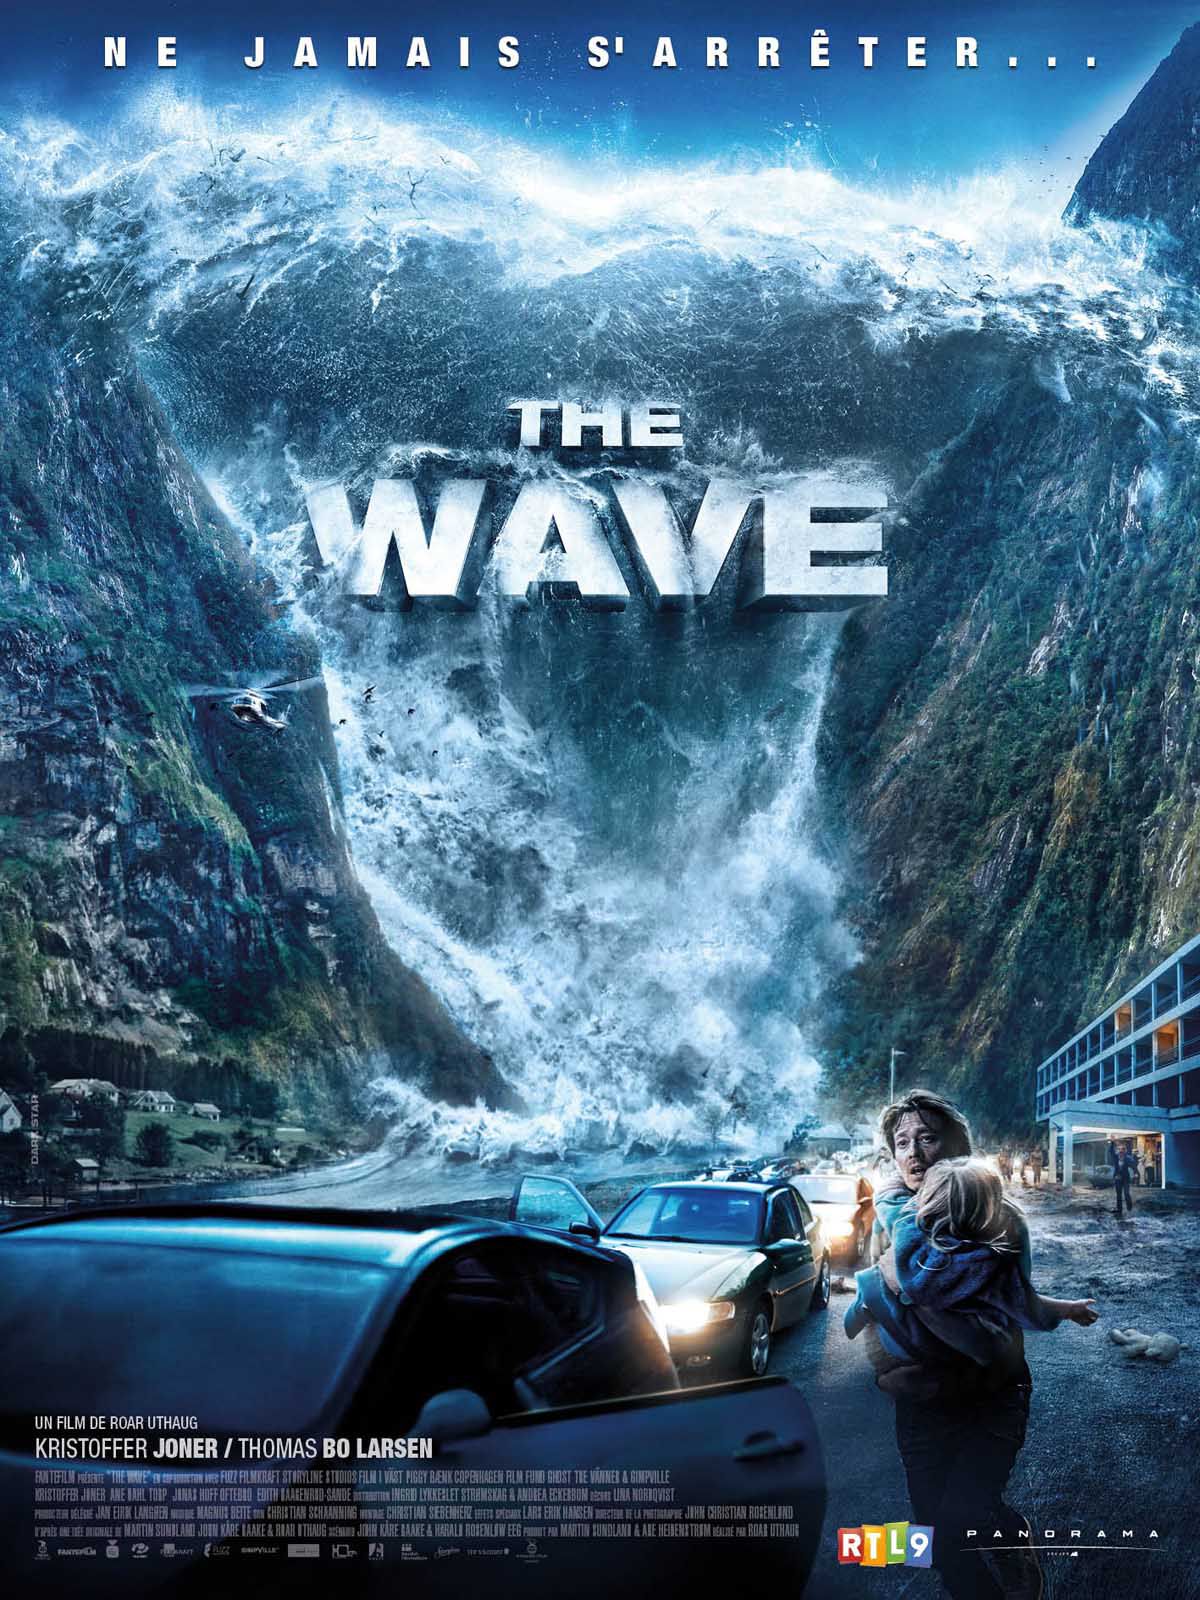 The Wave - Film (2015) streaming VF gratuit complet